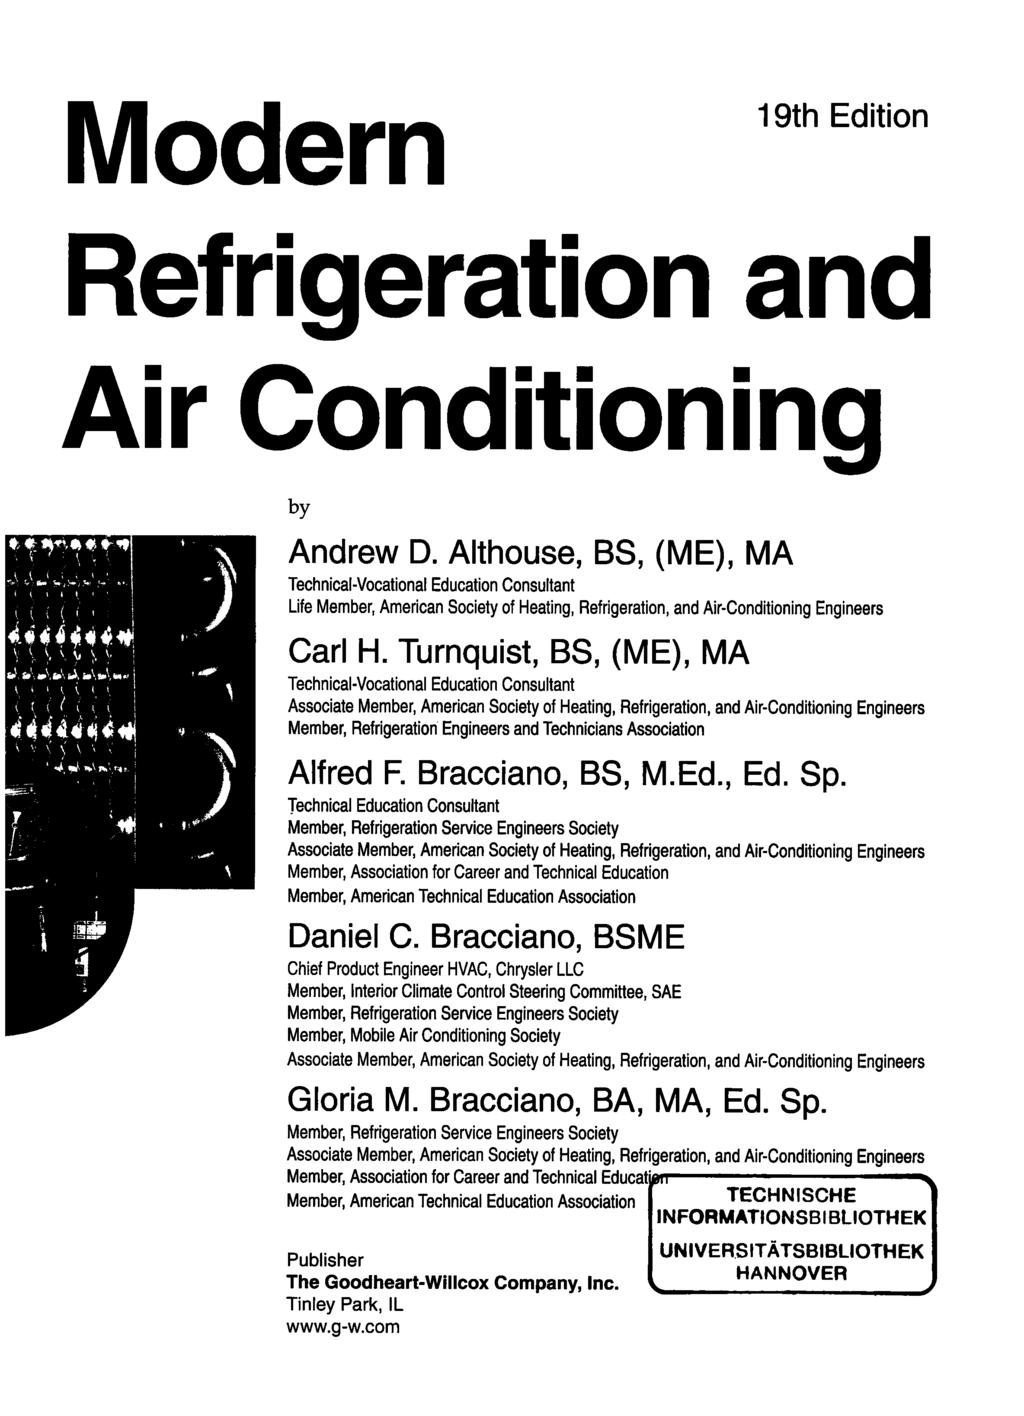 Modern Refrigeration and Air Conditioning by Andrew D.